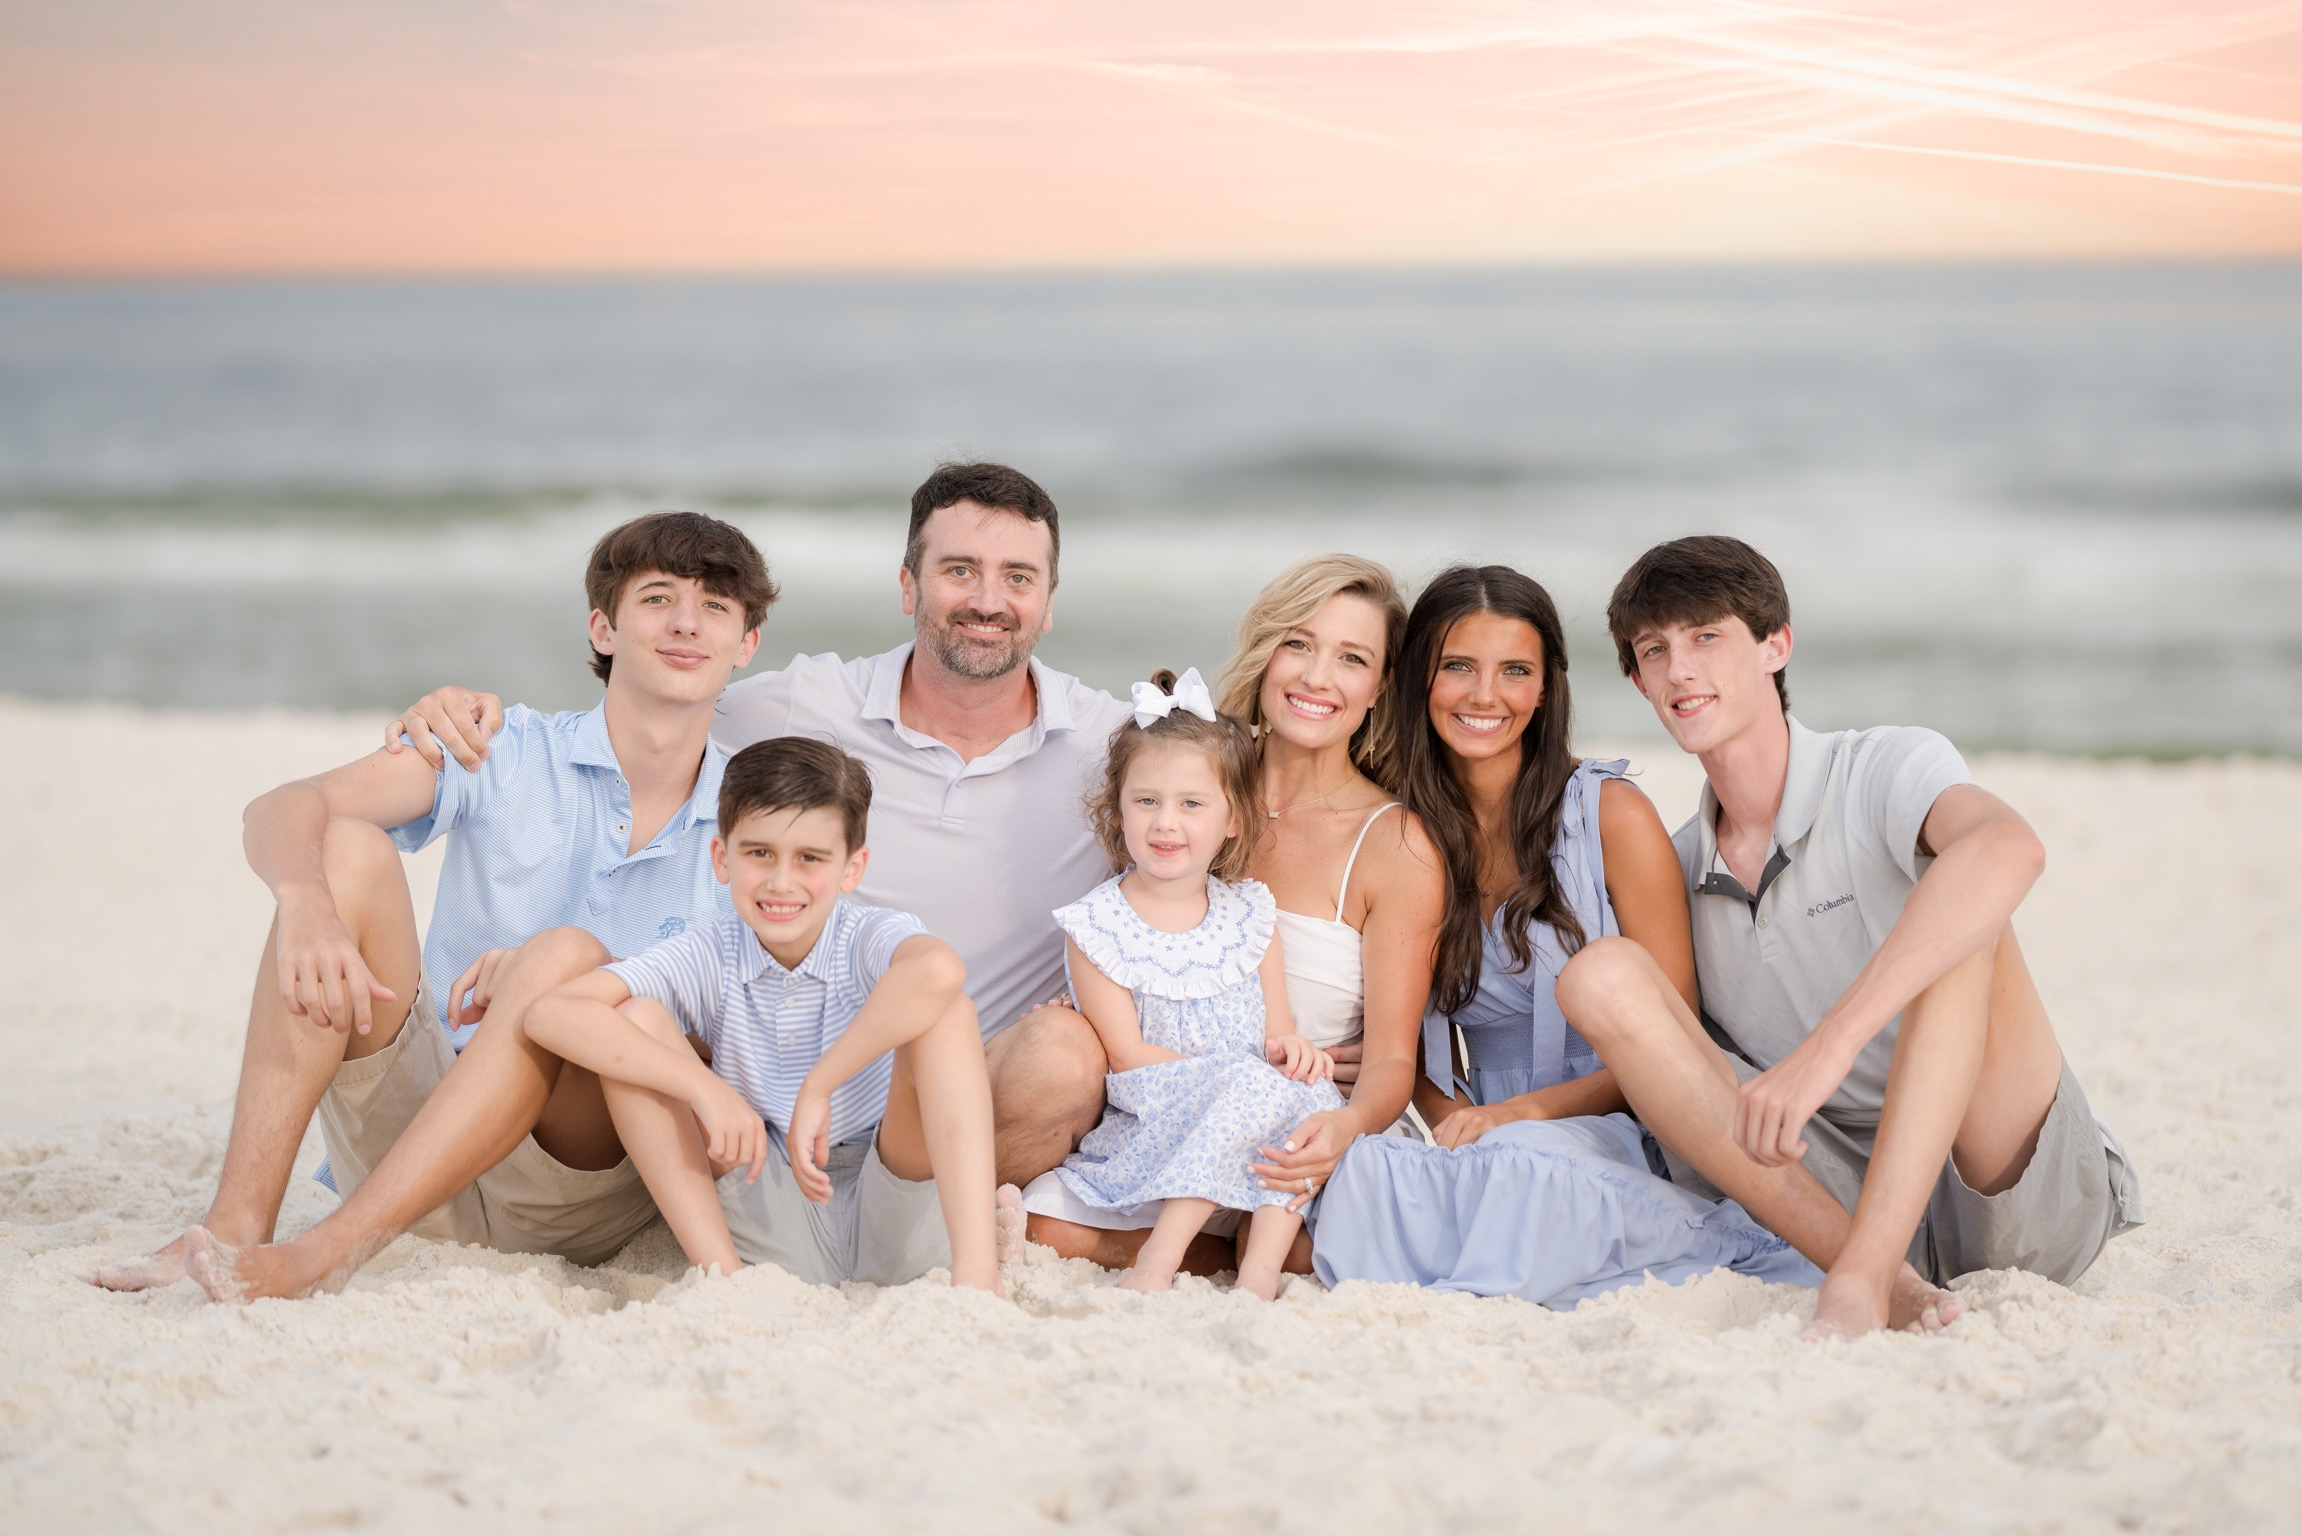 A family posing for a picture on the beach